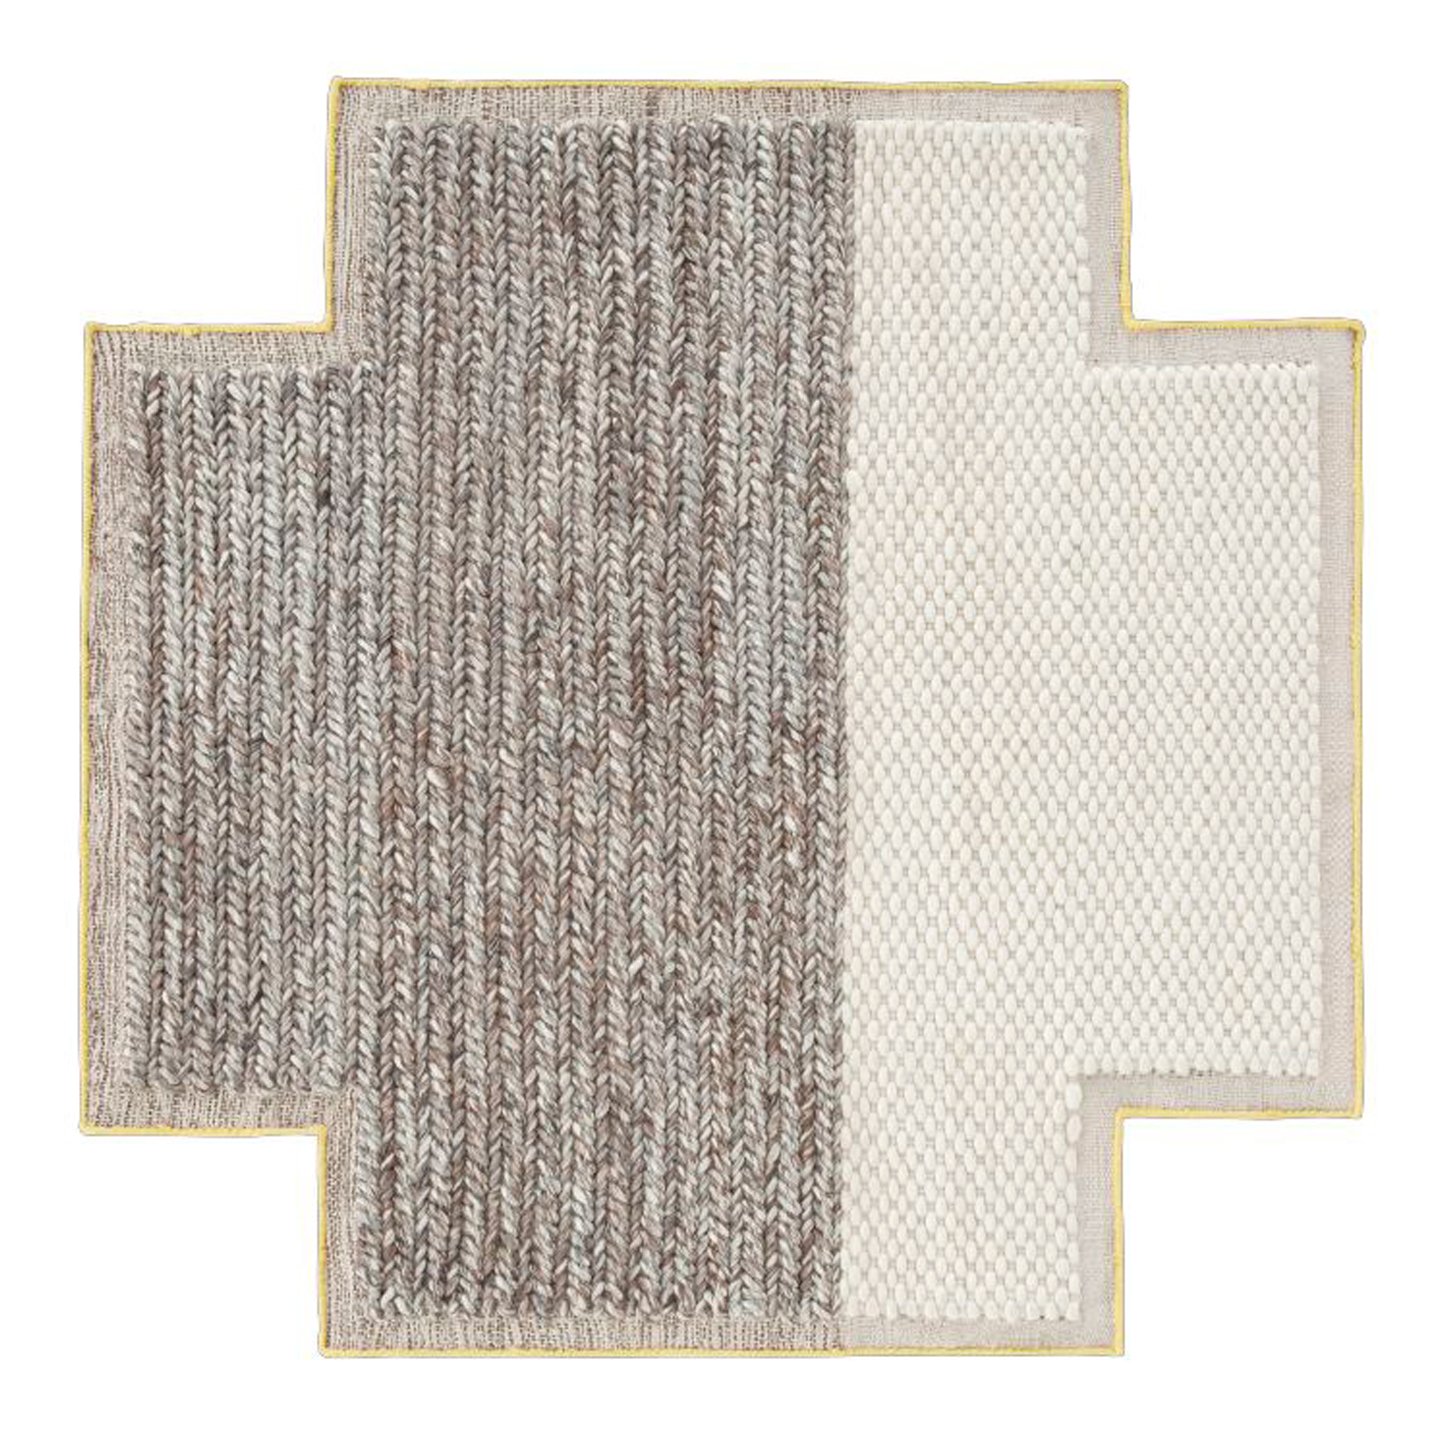 Haworth Mangas Space Rug in grey and white